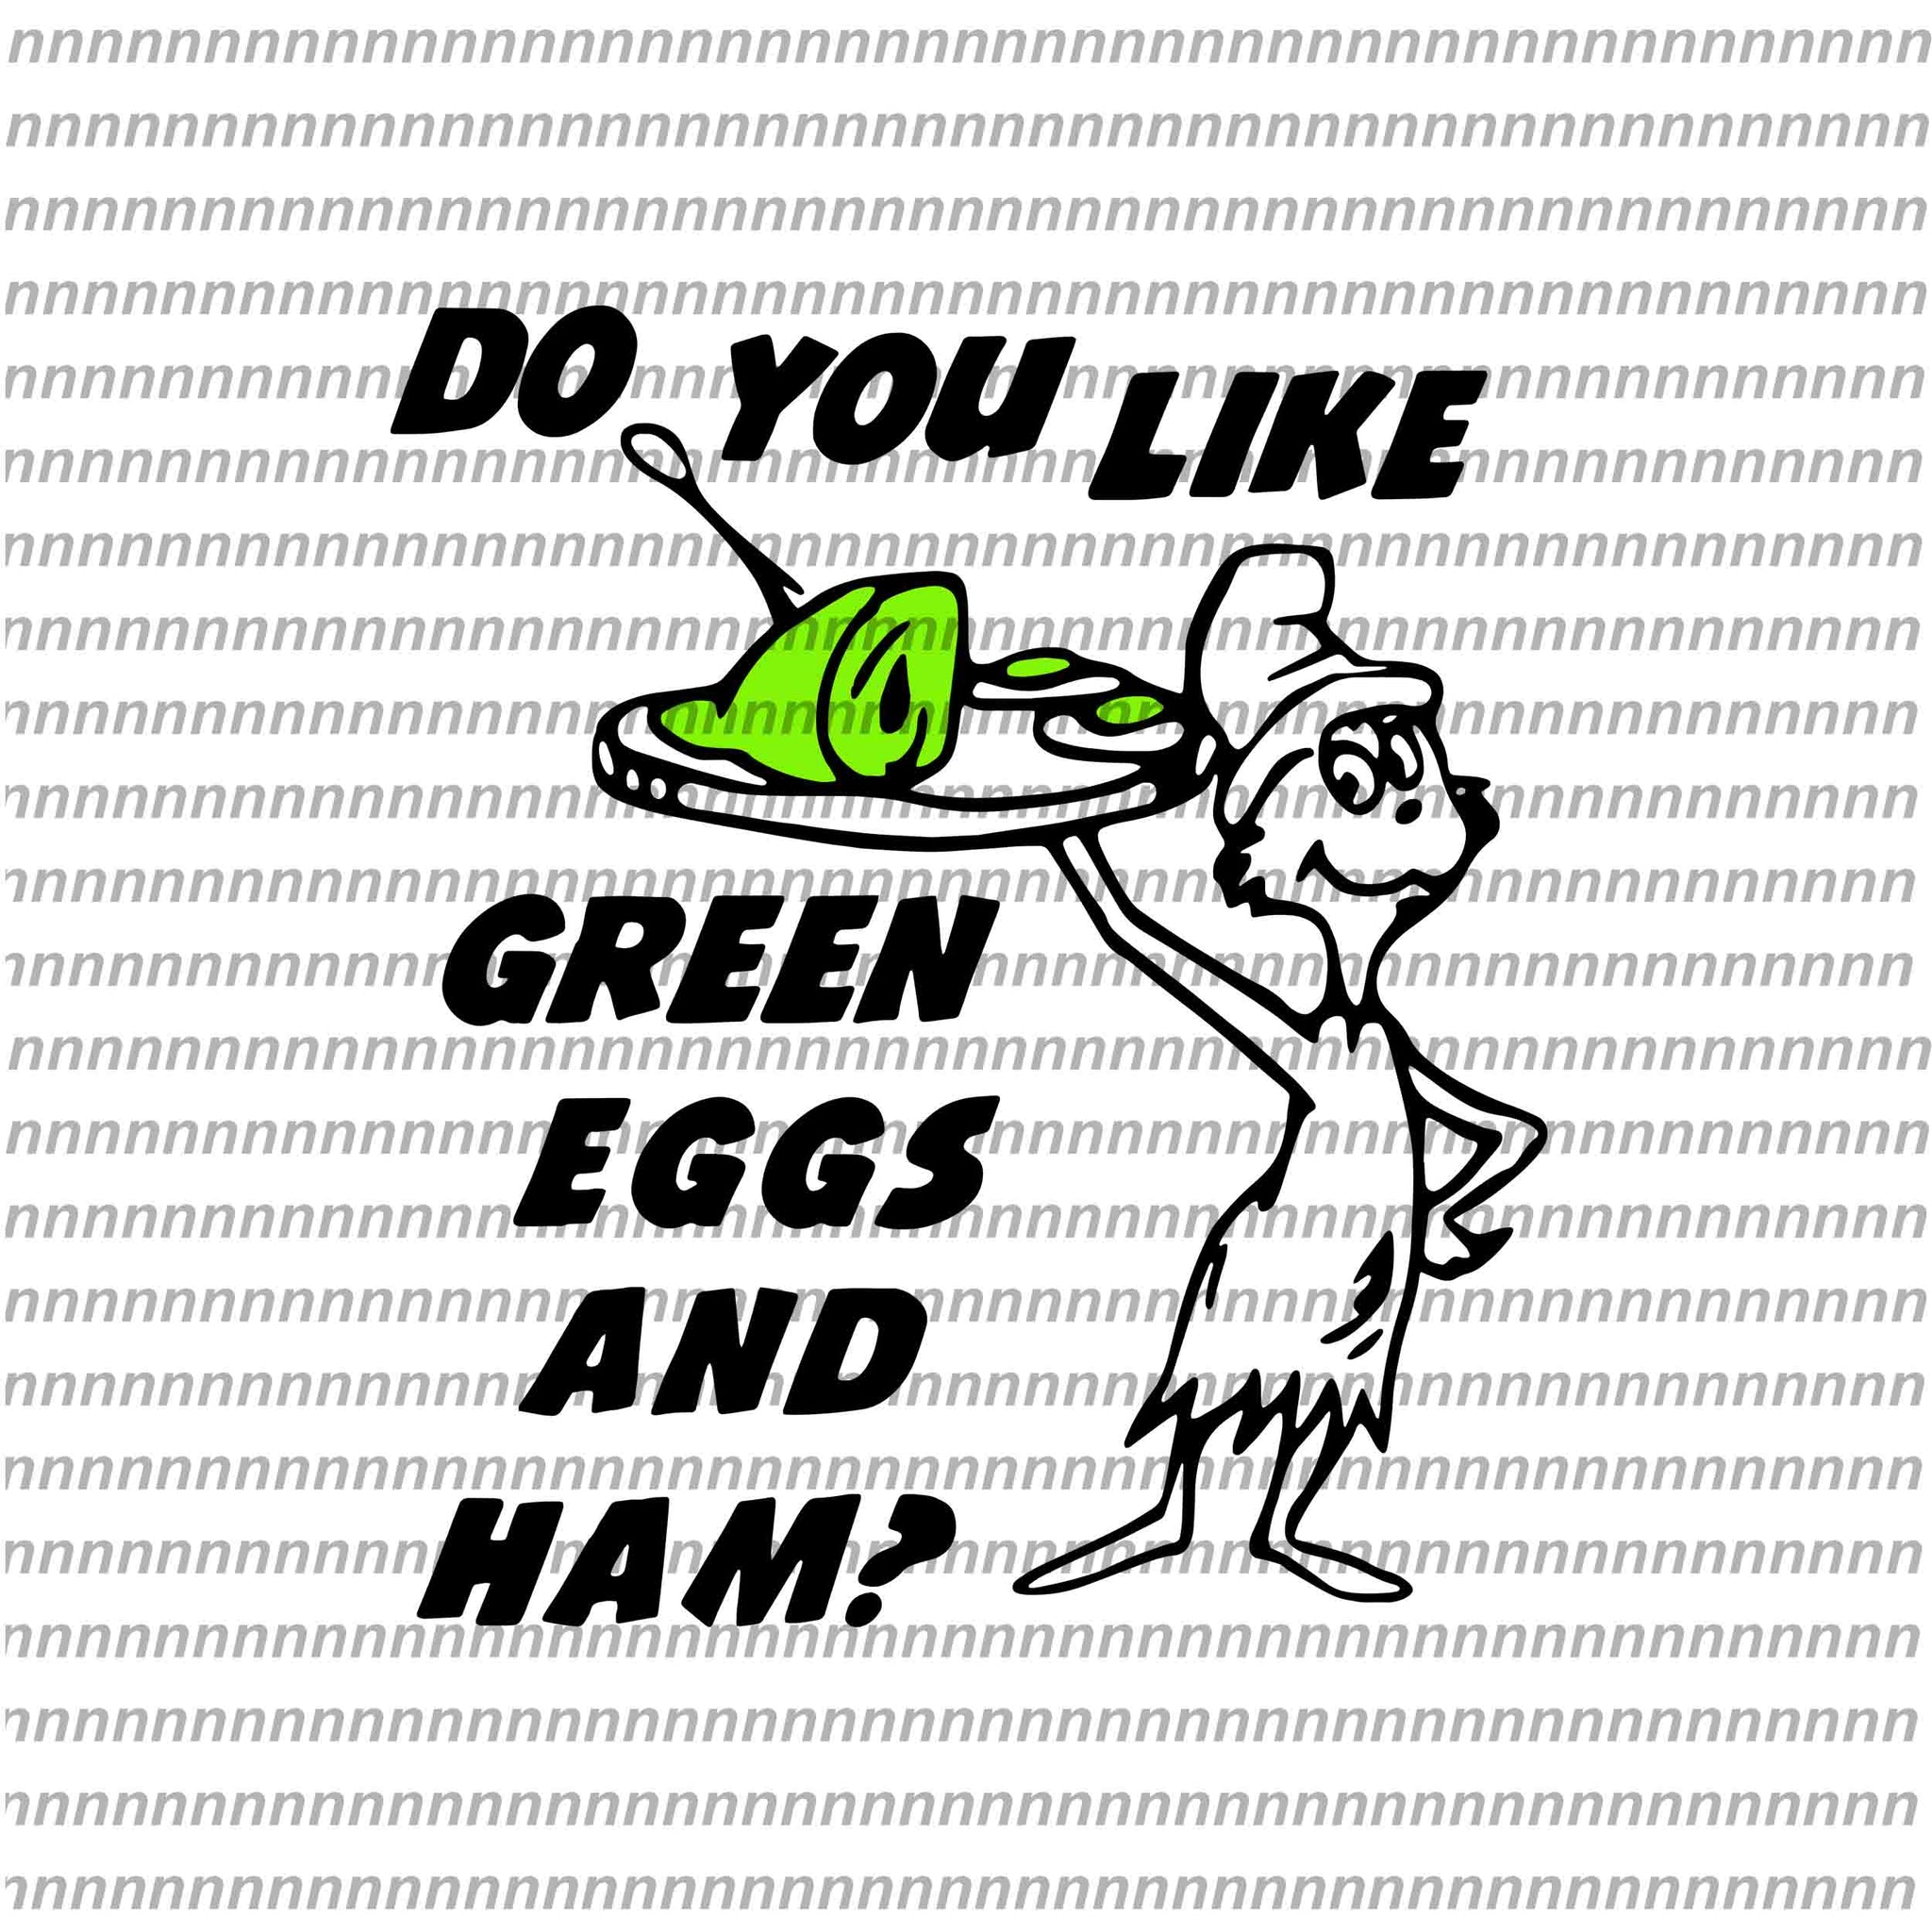 Do you like green eggs and ham, dr seuss svg, dr seuss vector, dr seuss quote, dr seuss design, Cat in the hat svg, thing 1 thing 2 thing 3, svg, png, dxf, eps file